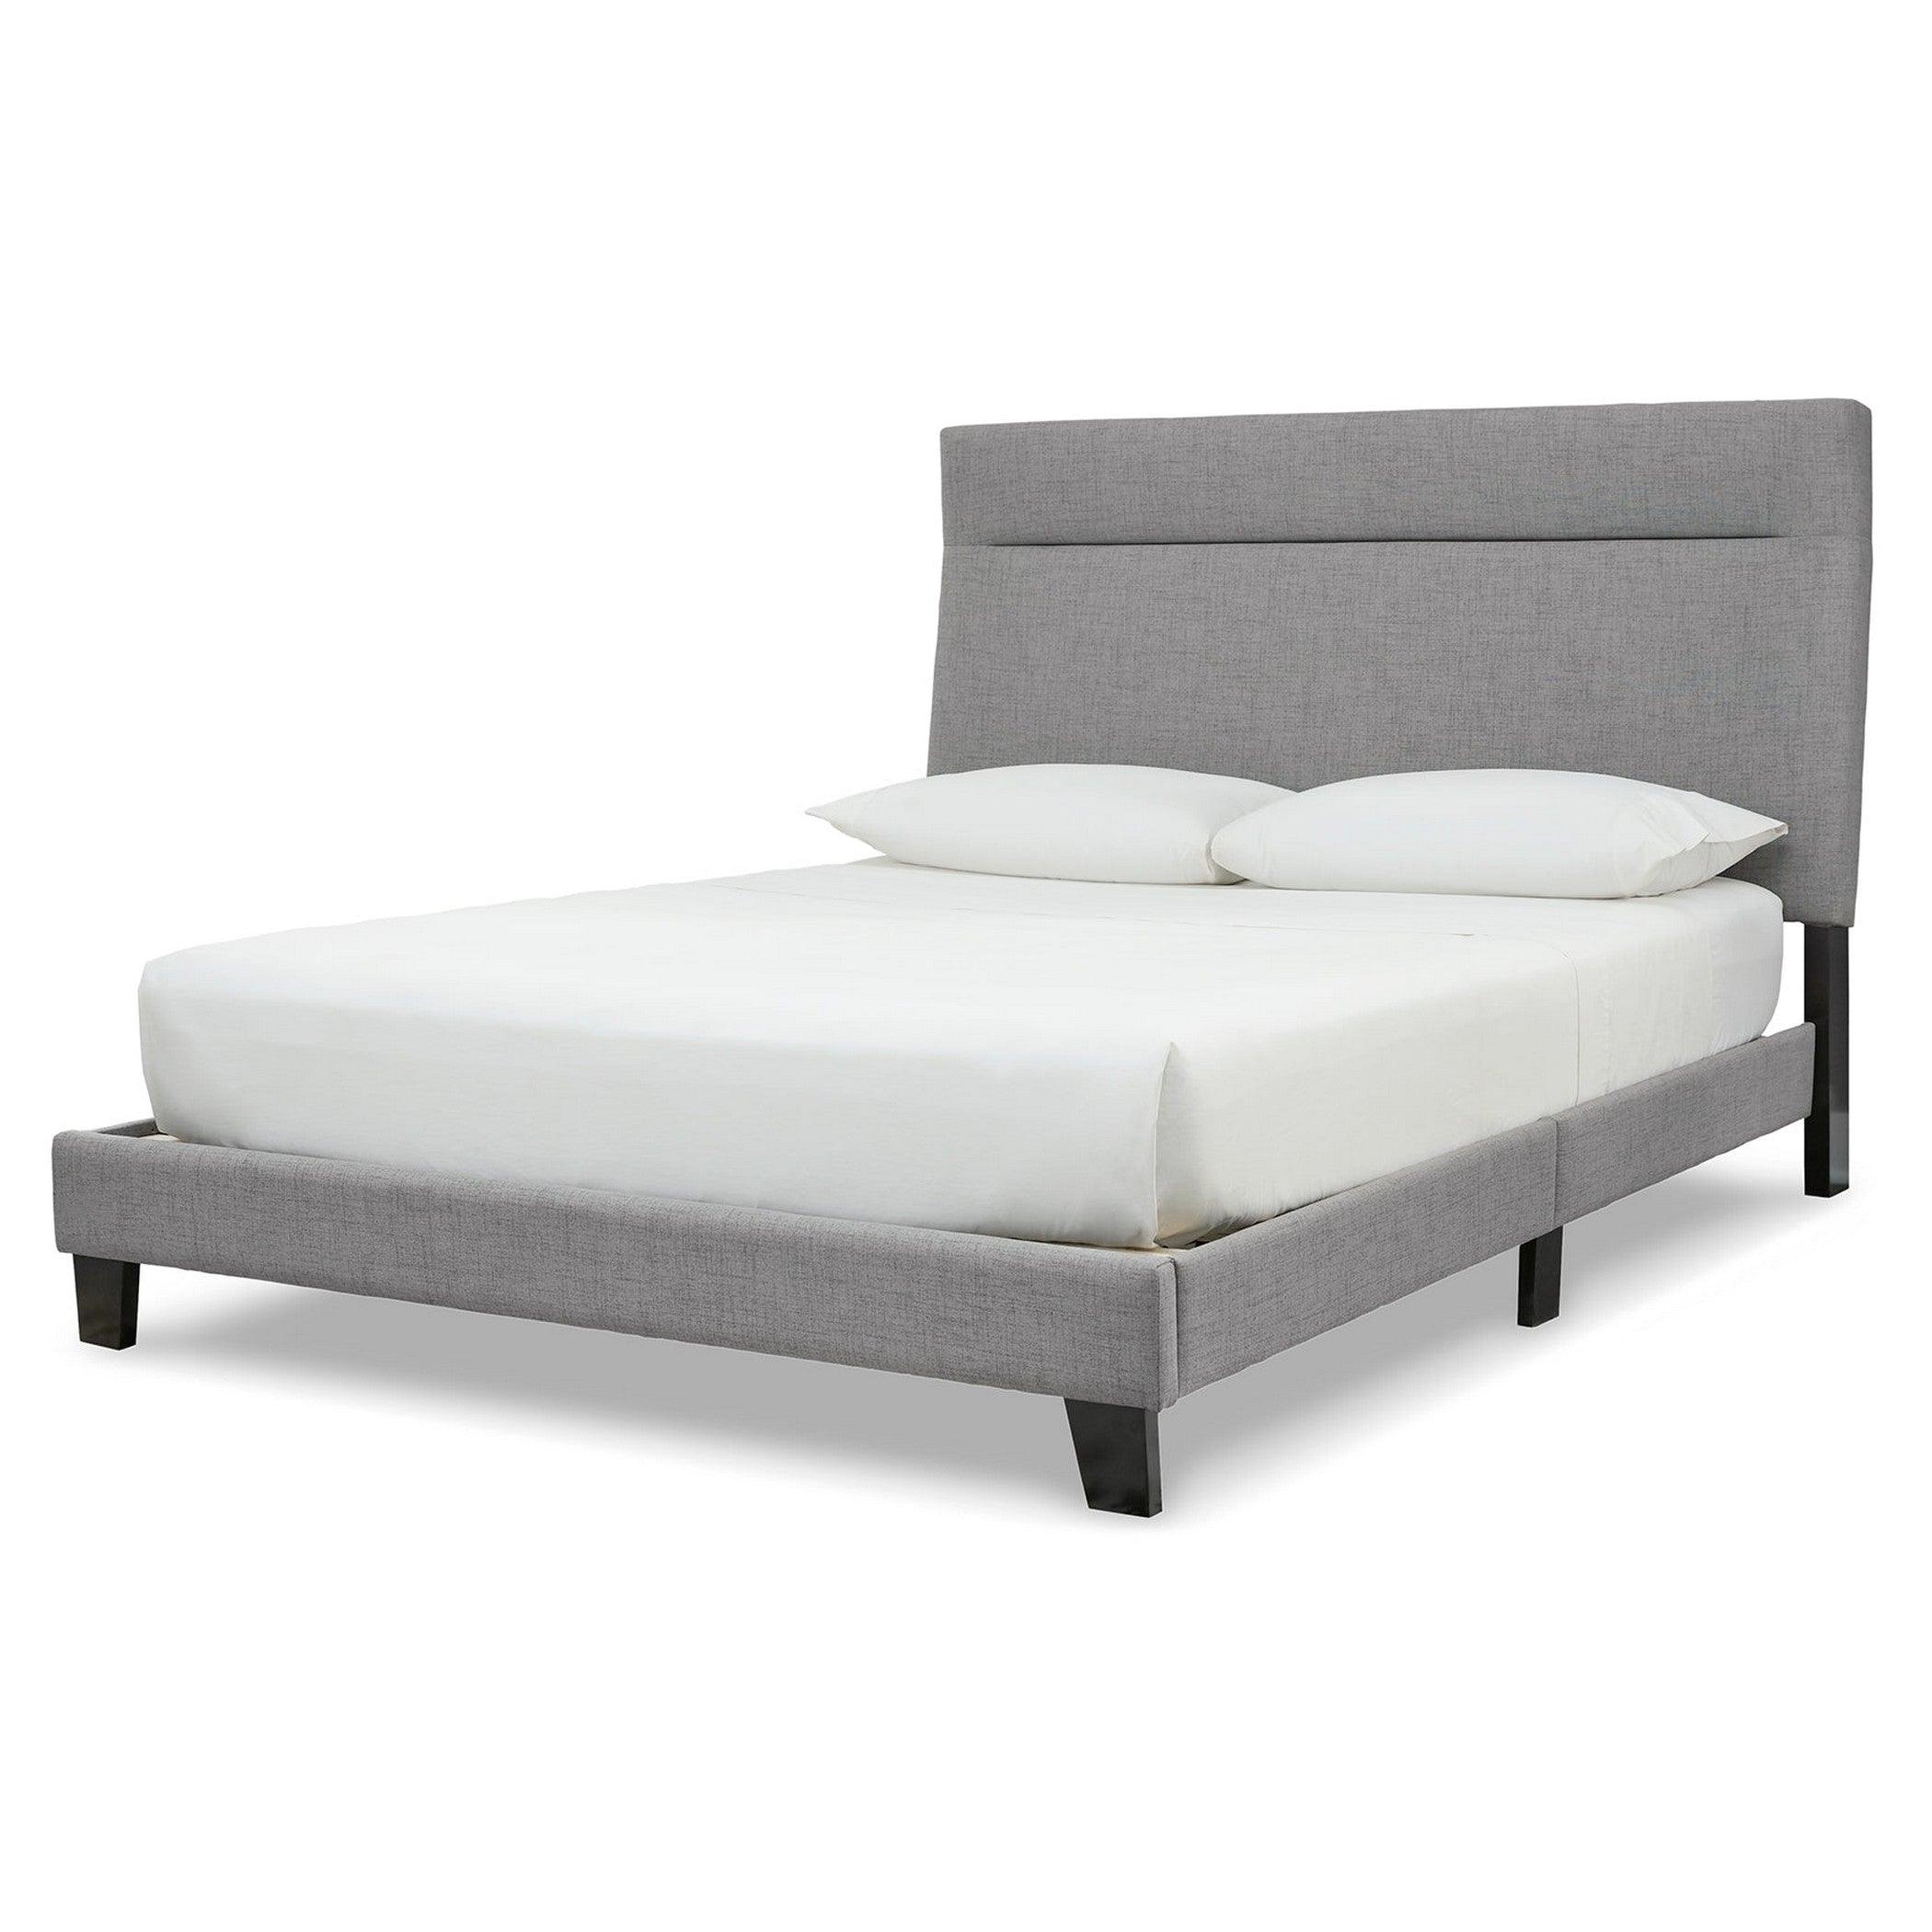 Adelloni Upholstered Bed Simplify your space - Ash-B080-381 - Underkut